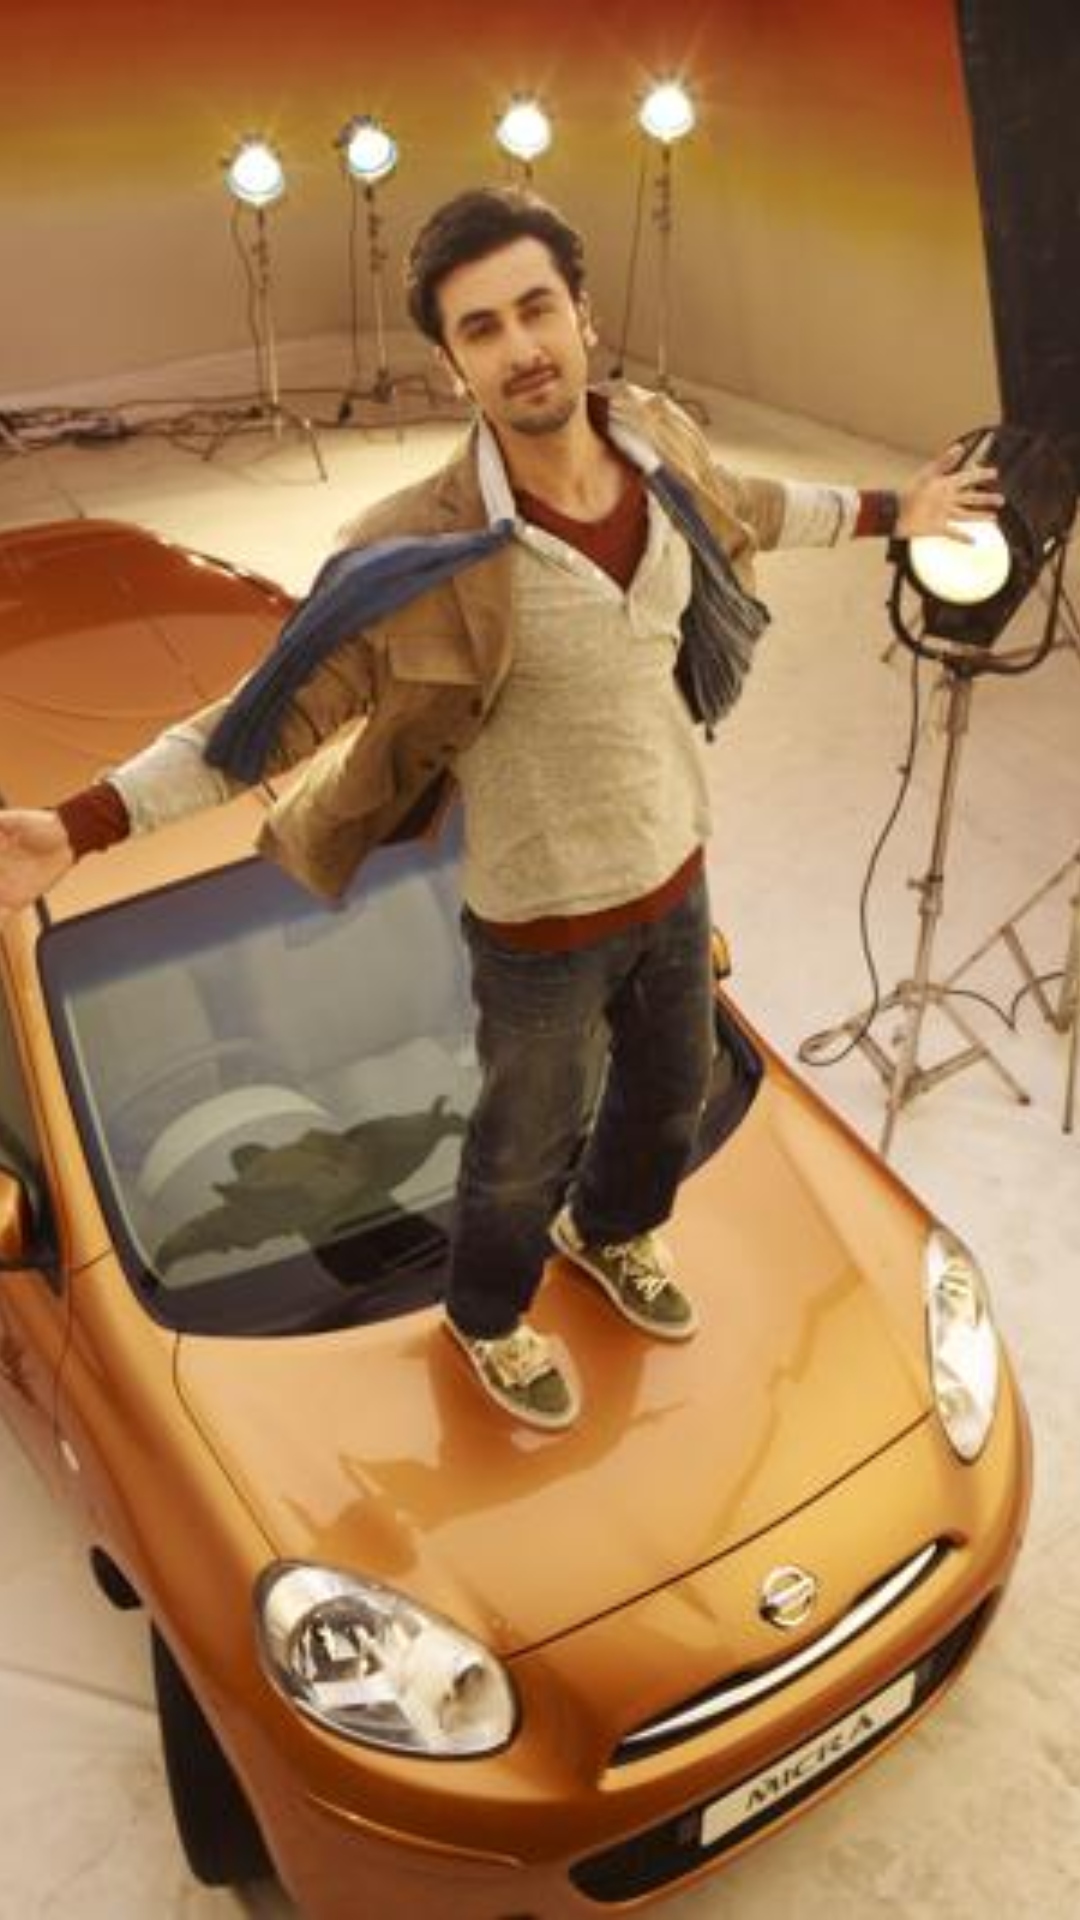 DYK Ranbir Kapoor has a luxury car collection worth over Rs 15 cr? Check out the cars he owns